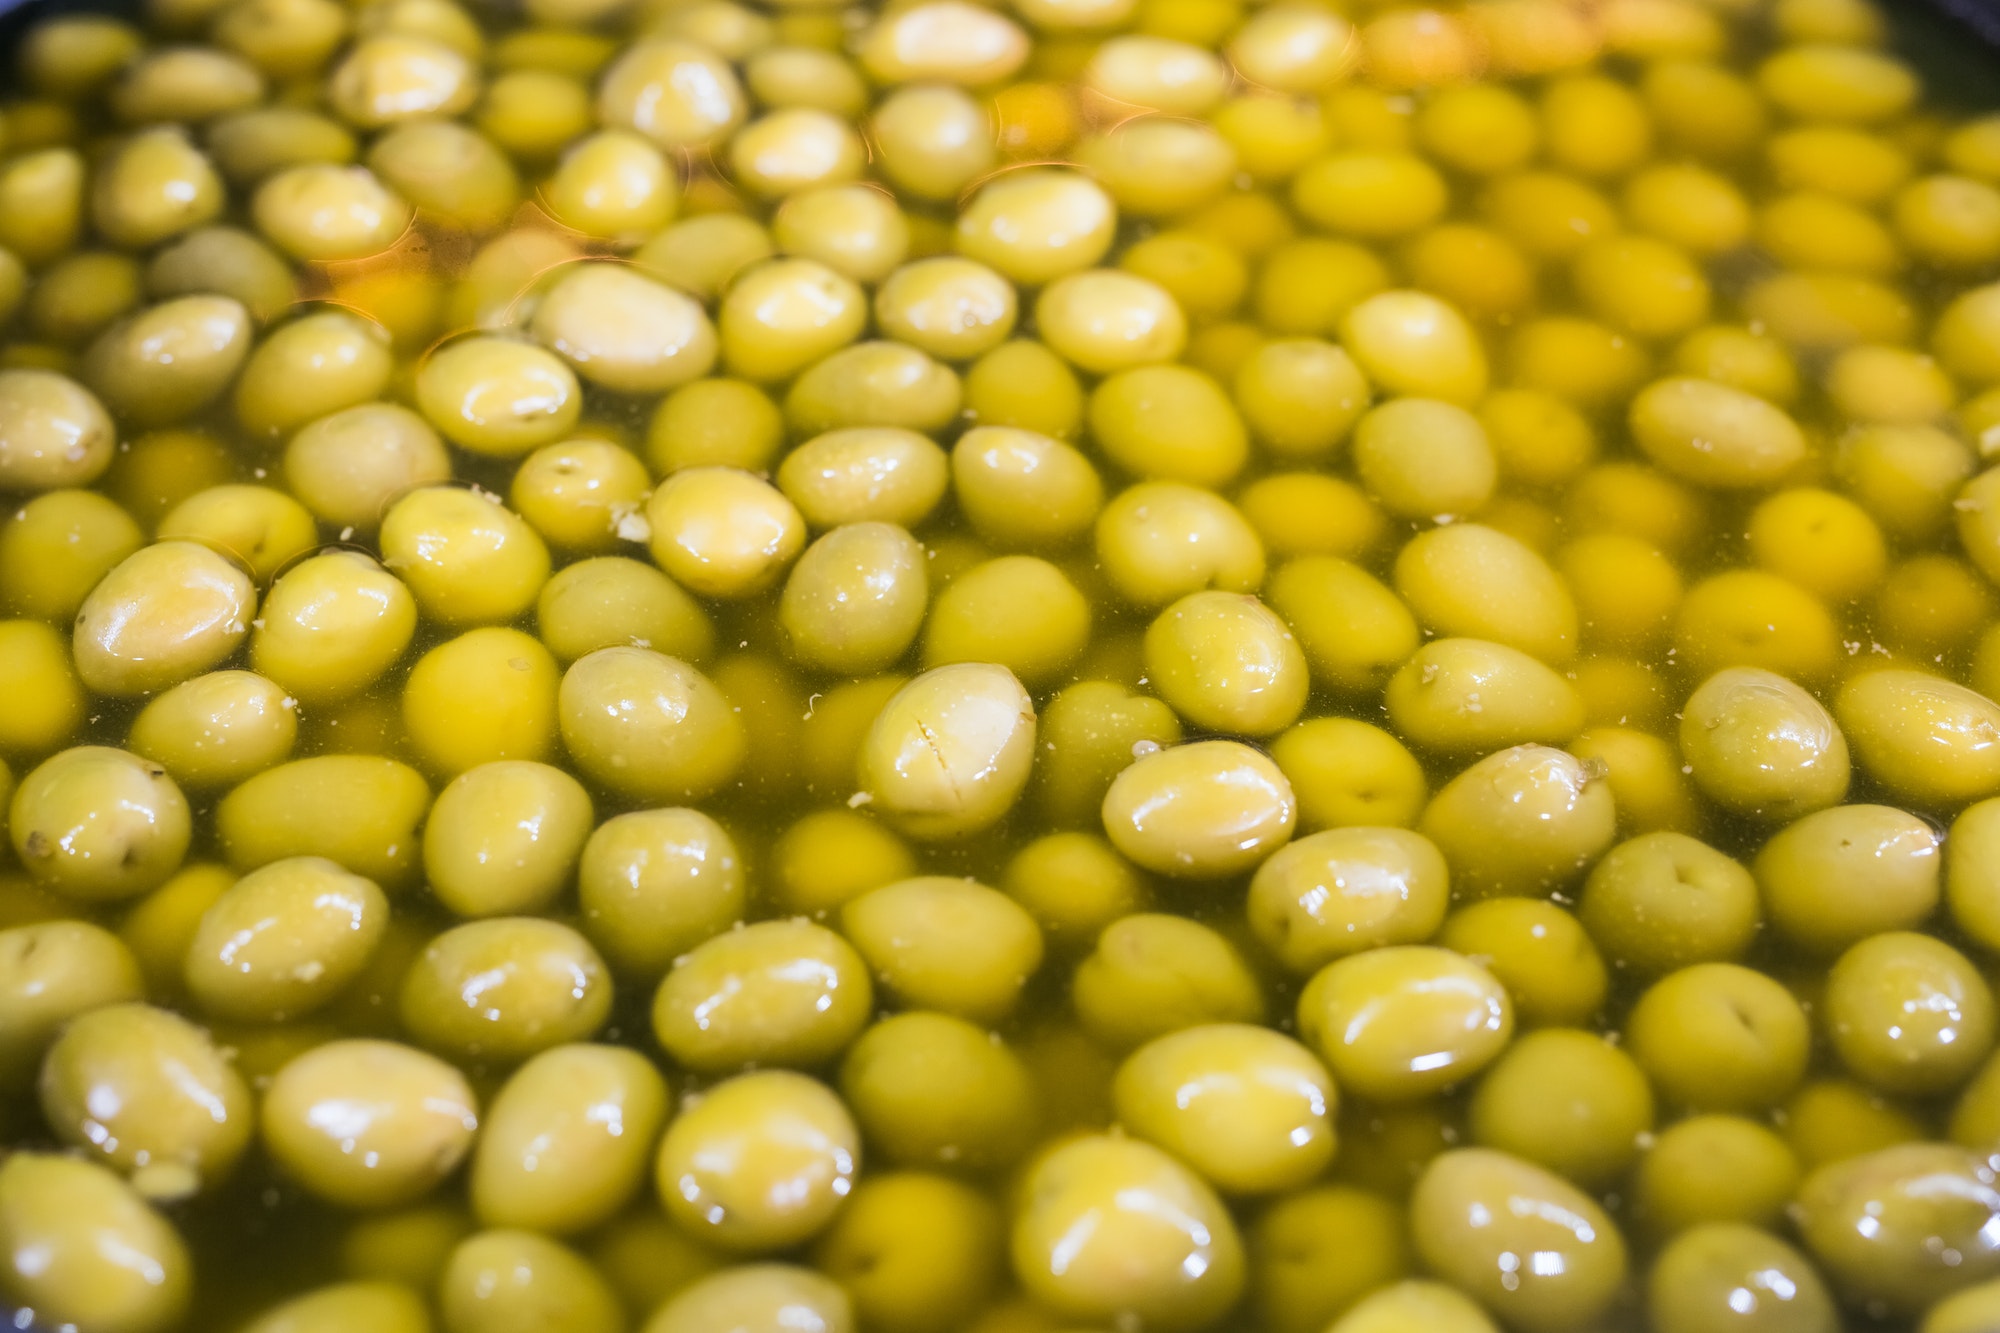 A lot of fresh green olives in a bowl